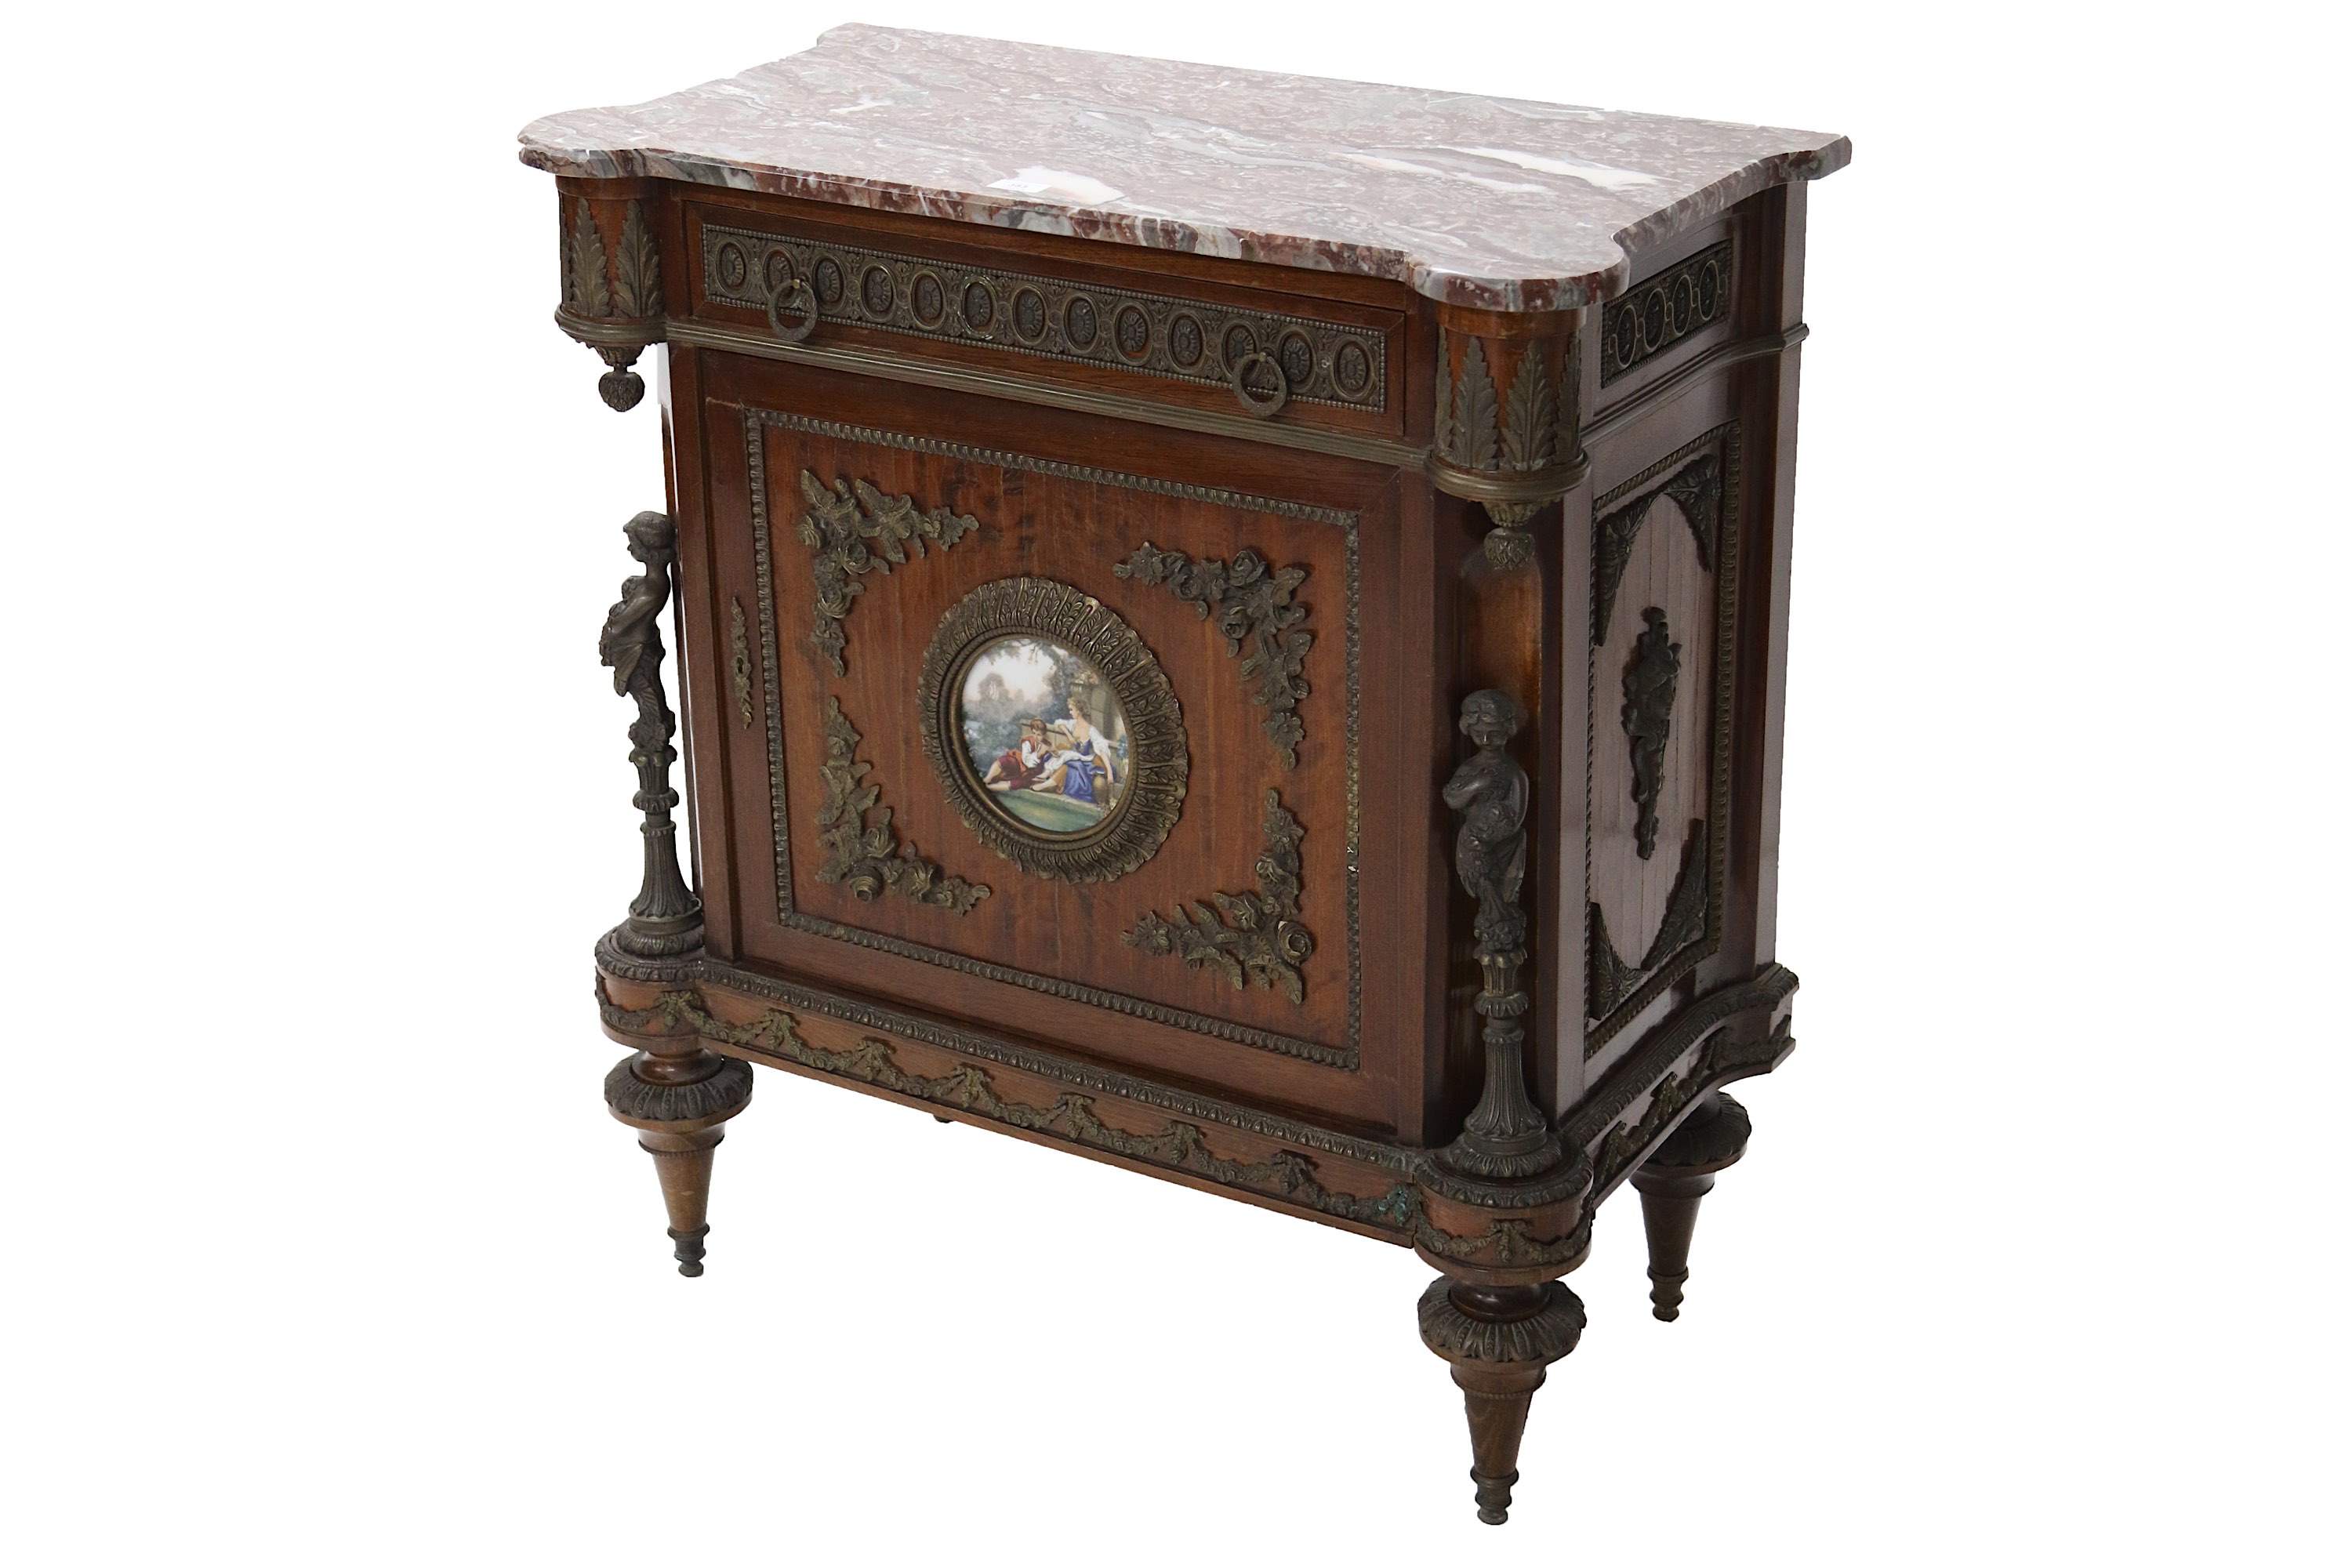 A late 19th to early 20th Century Russian mahogany veneered side cabinet, the marble top over a